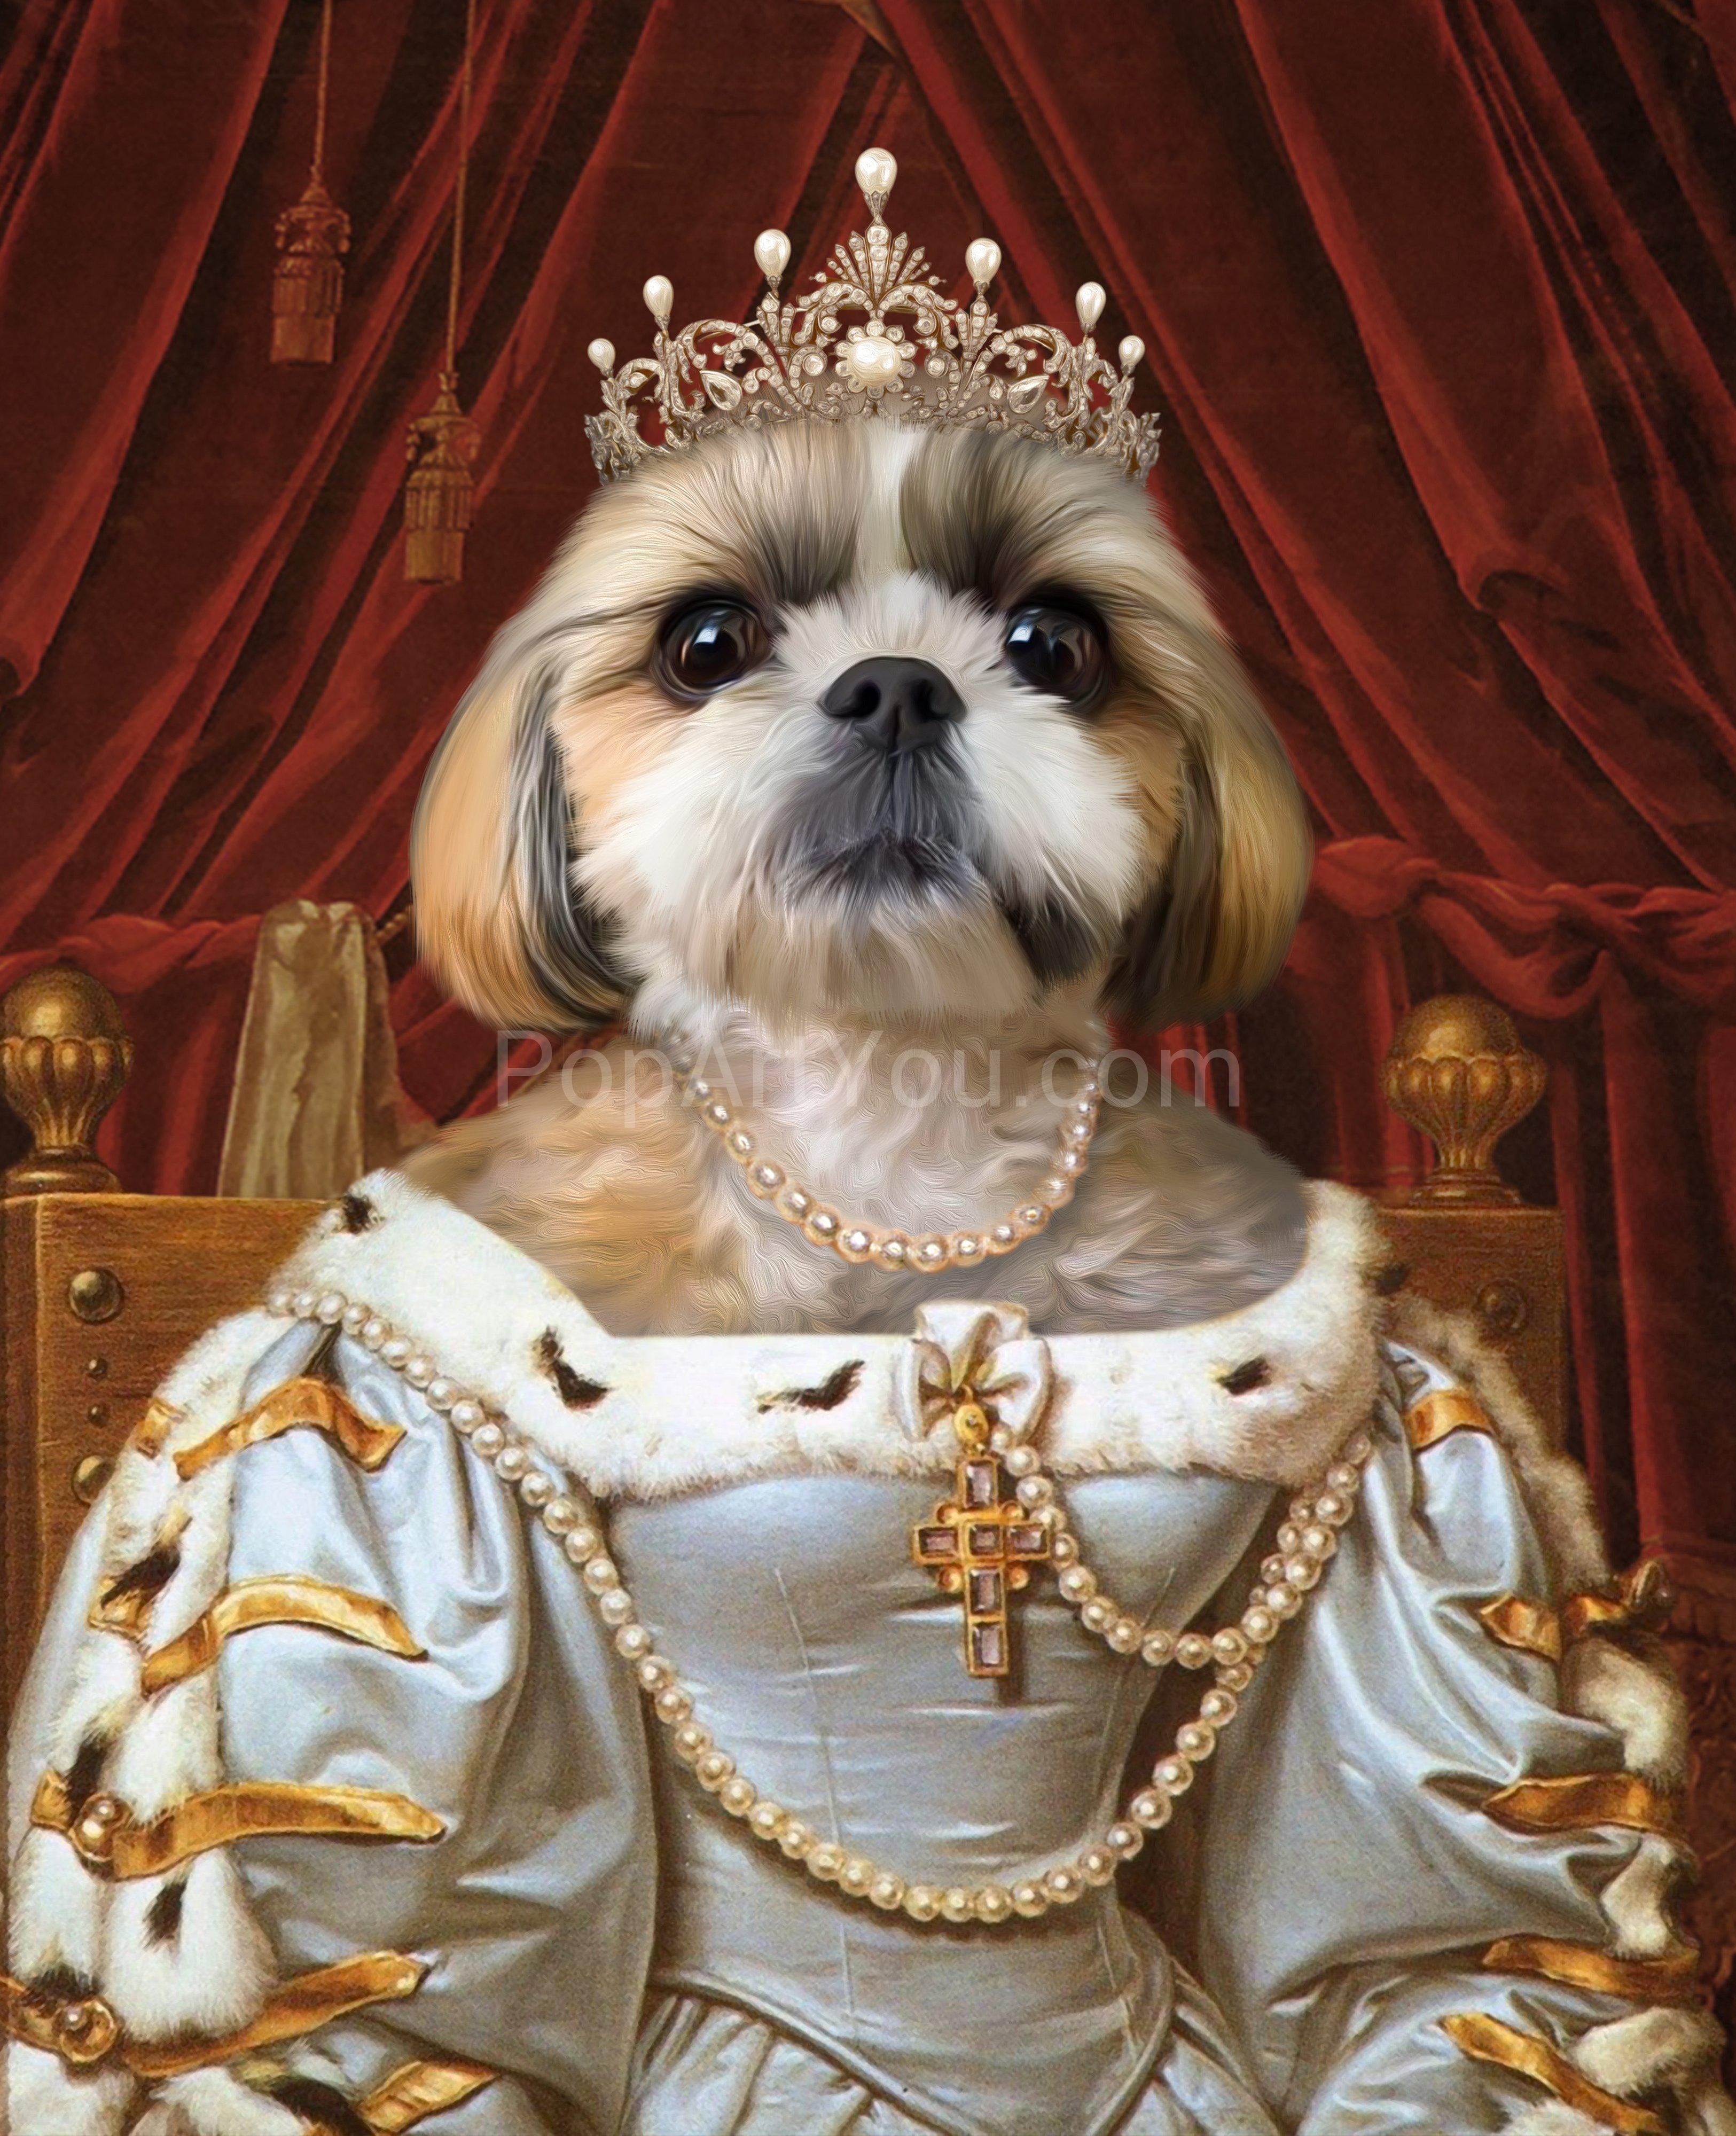 The portrait shows a female dog with a human body dressed in a white regal dress with a crown and a cross